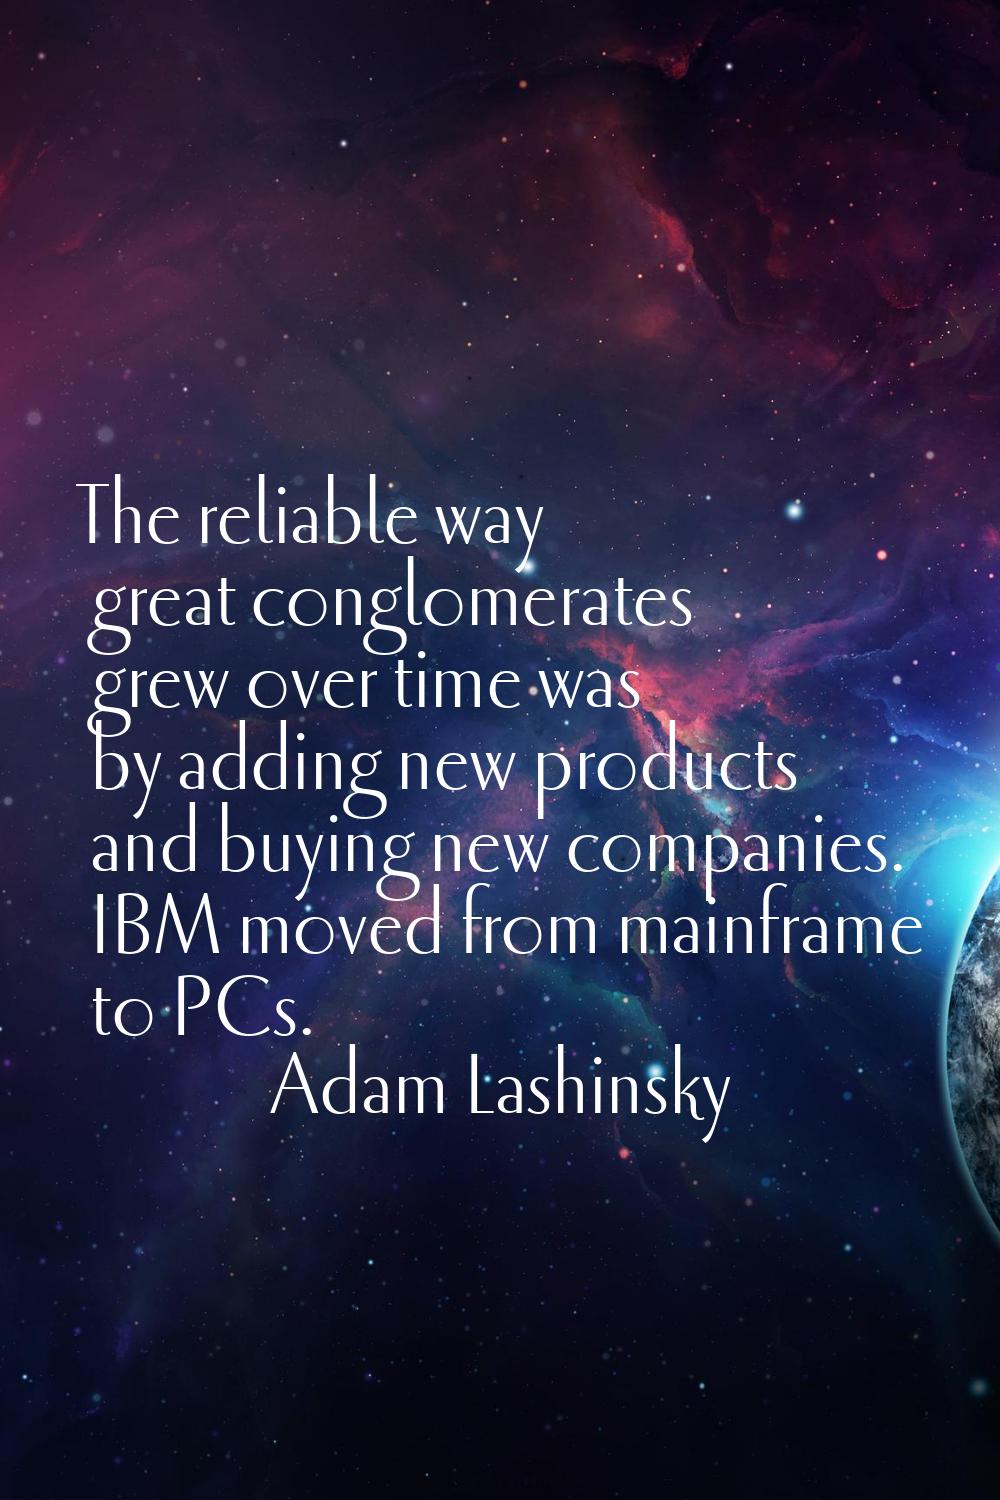 The reliable way great conglomerates grew over time was by adding new products and buying new compa